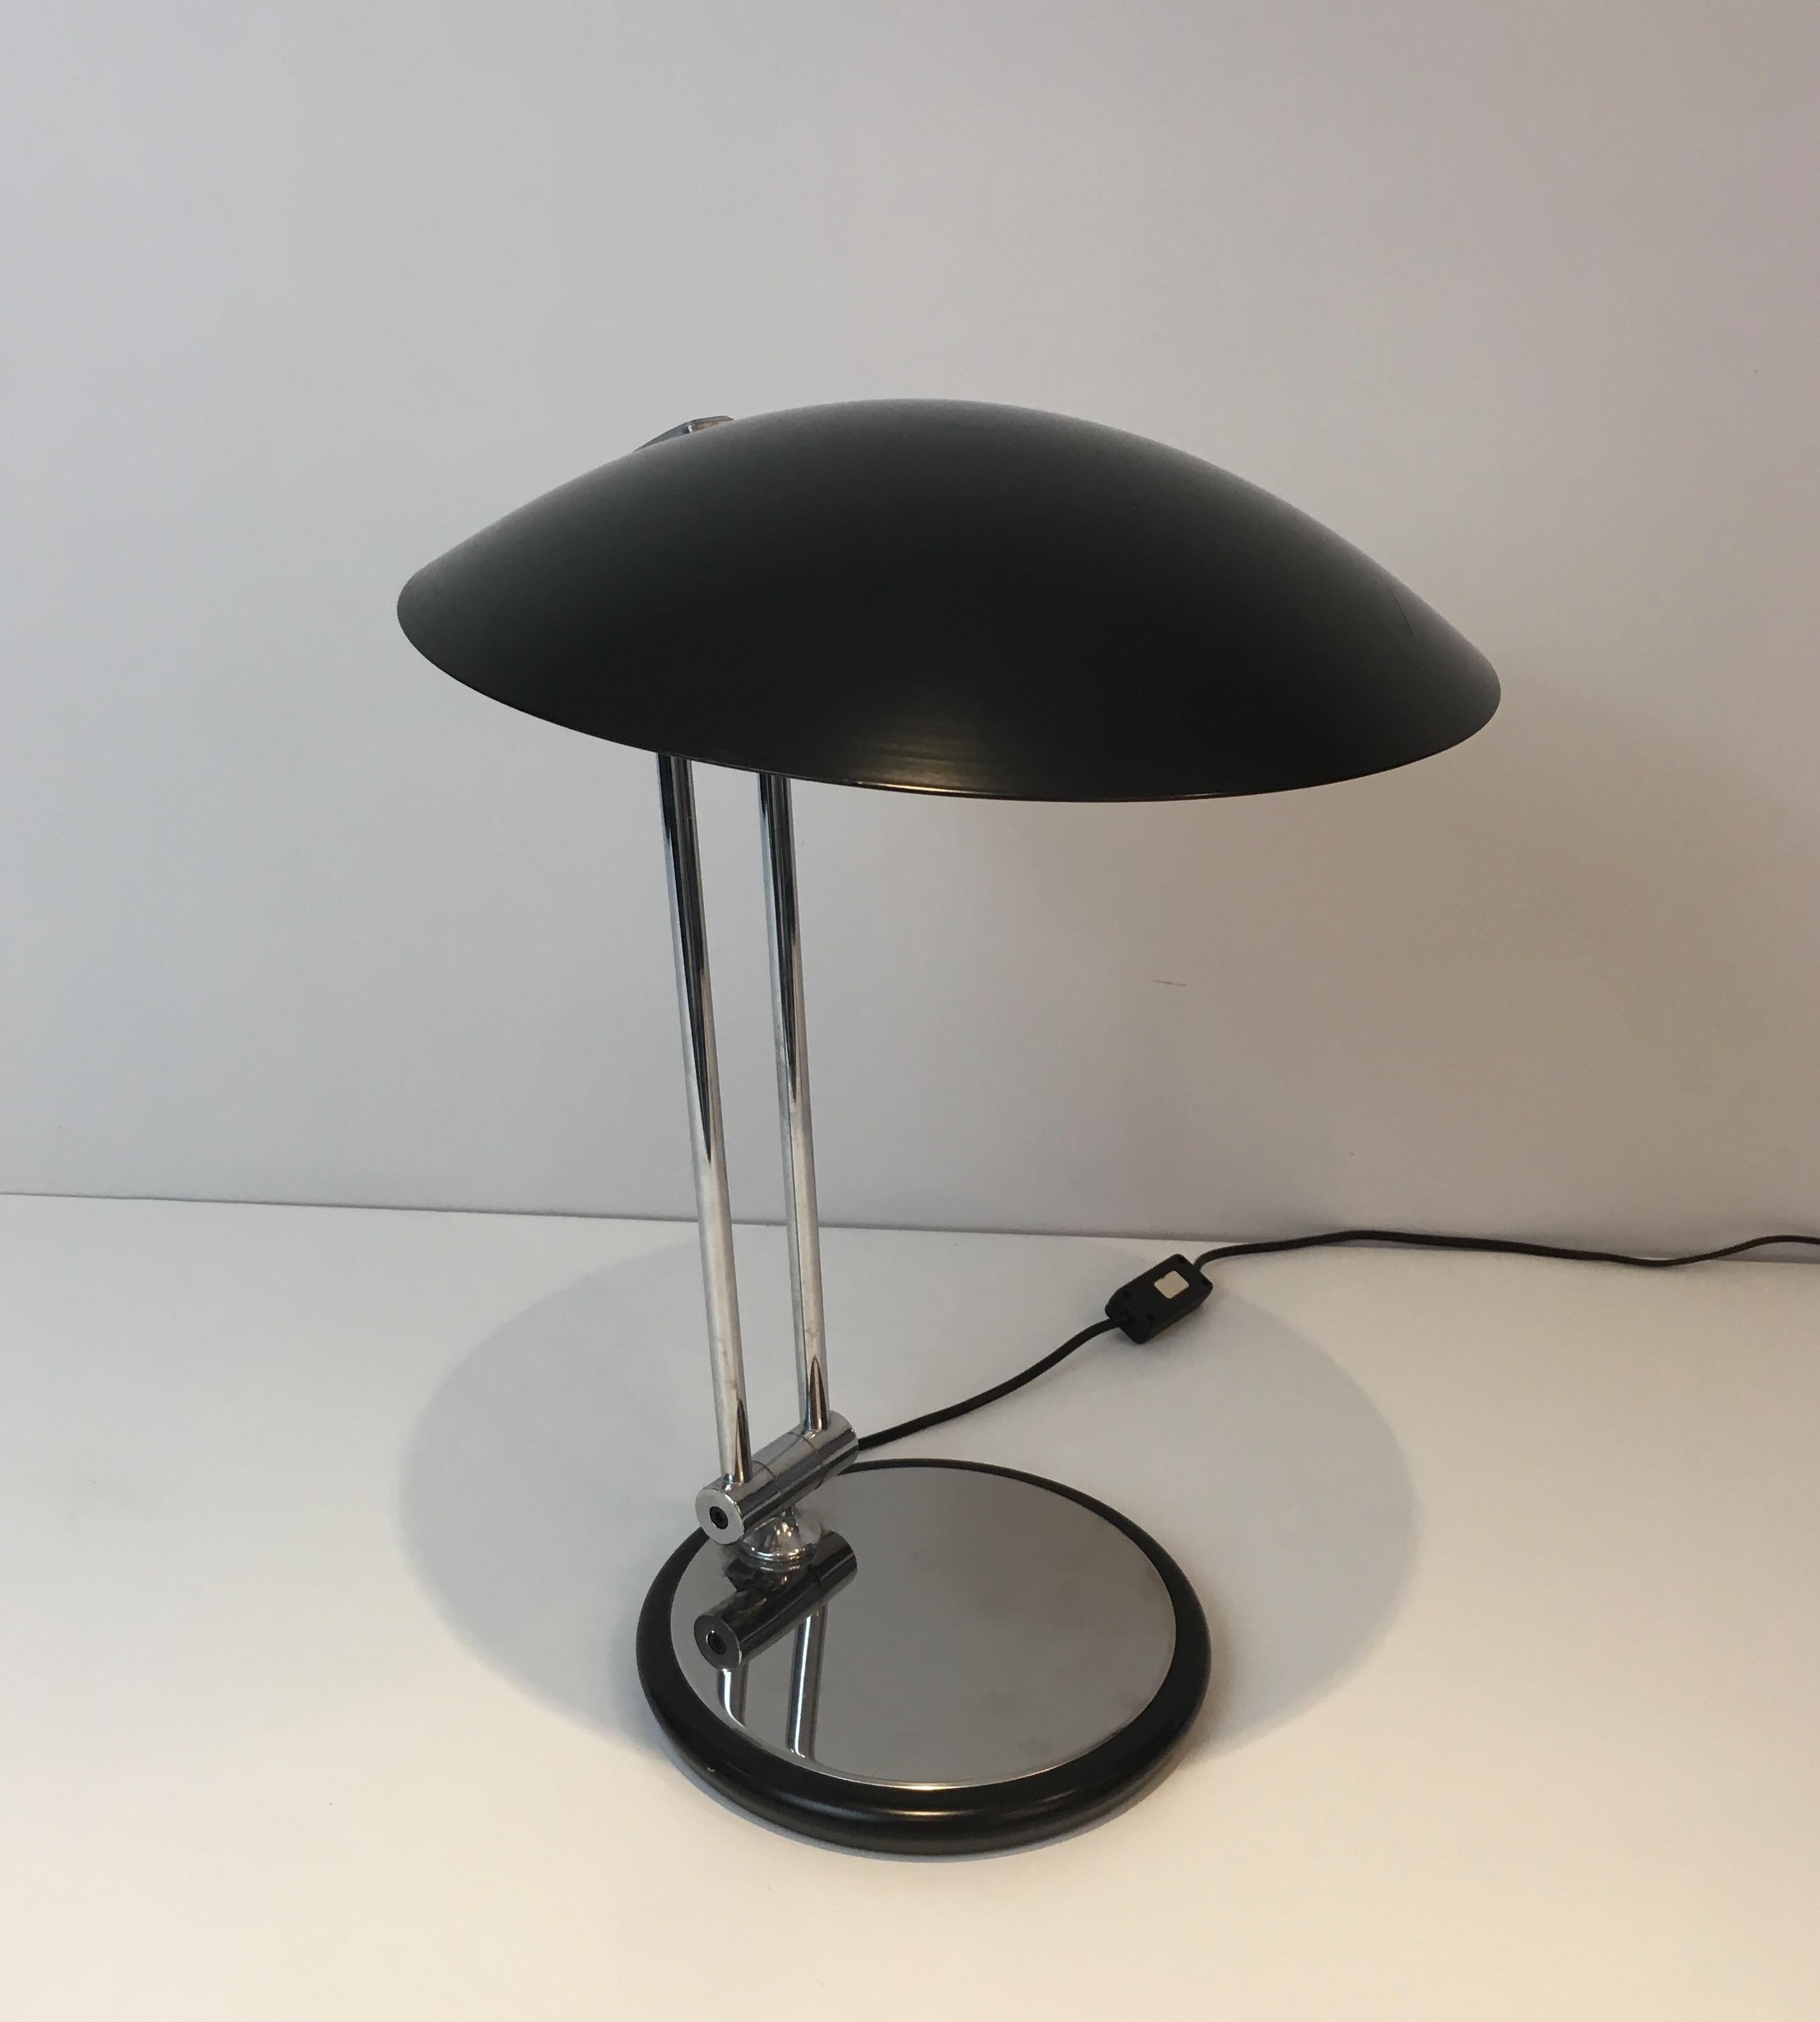 Design Adjustable Chrome and Black Lacquered Desk Lamp, circa 1970 For Sale 7